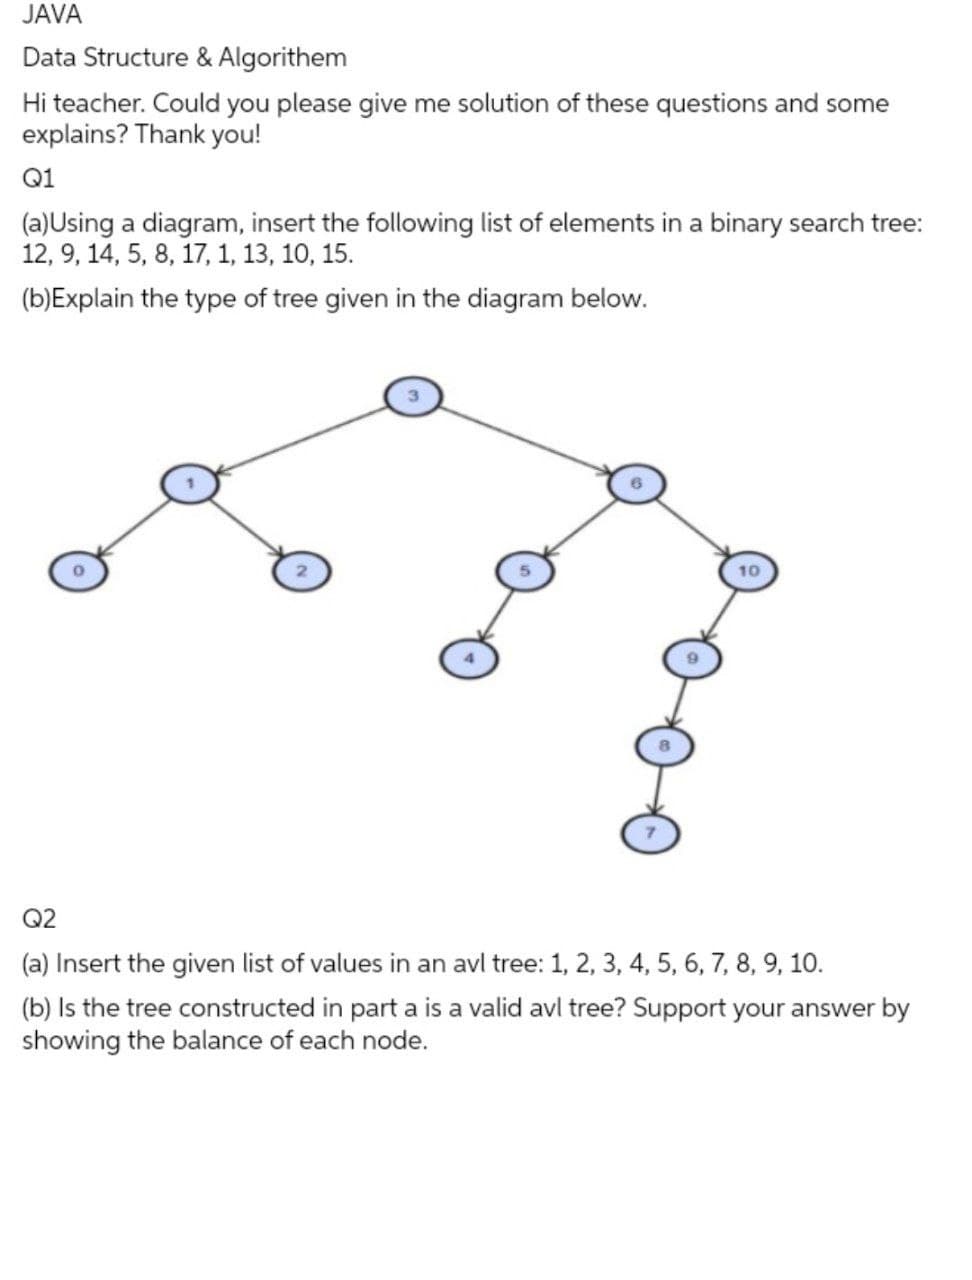 JAVA
Data Structure & Algorithem
Hi teacher. Could you please give me solution of these questions and some
explains? Thank you!
Q1
(a)Using a diagram, insert the following list of elements in a binary search tree:
12, 9, 14, 5, 8, 17, 1, 13, 10, 15.
(b)Explain the type of tree given in the diagram below.
10
Q2
(a) Insert the given list of values in an avl tree: 1, 2, 3, 4, 5, 6, 7, 8, 9, 10.
(b) Is the tree constructed in part a is a valid avl tree? Support your answer by
showing the balance of each node.
